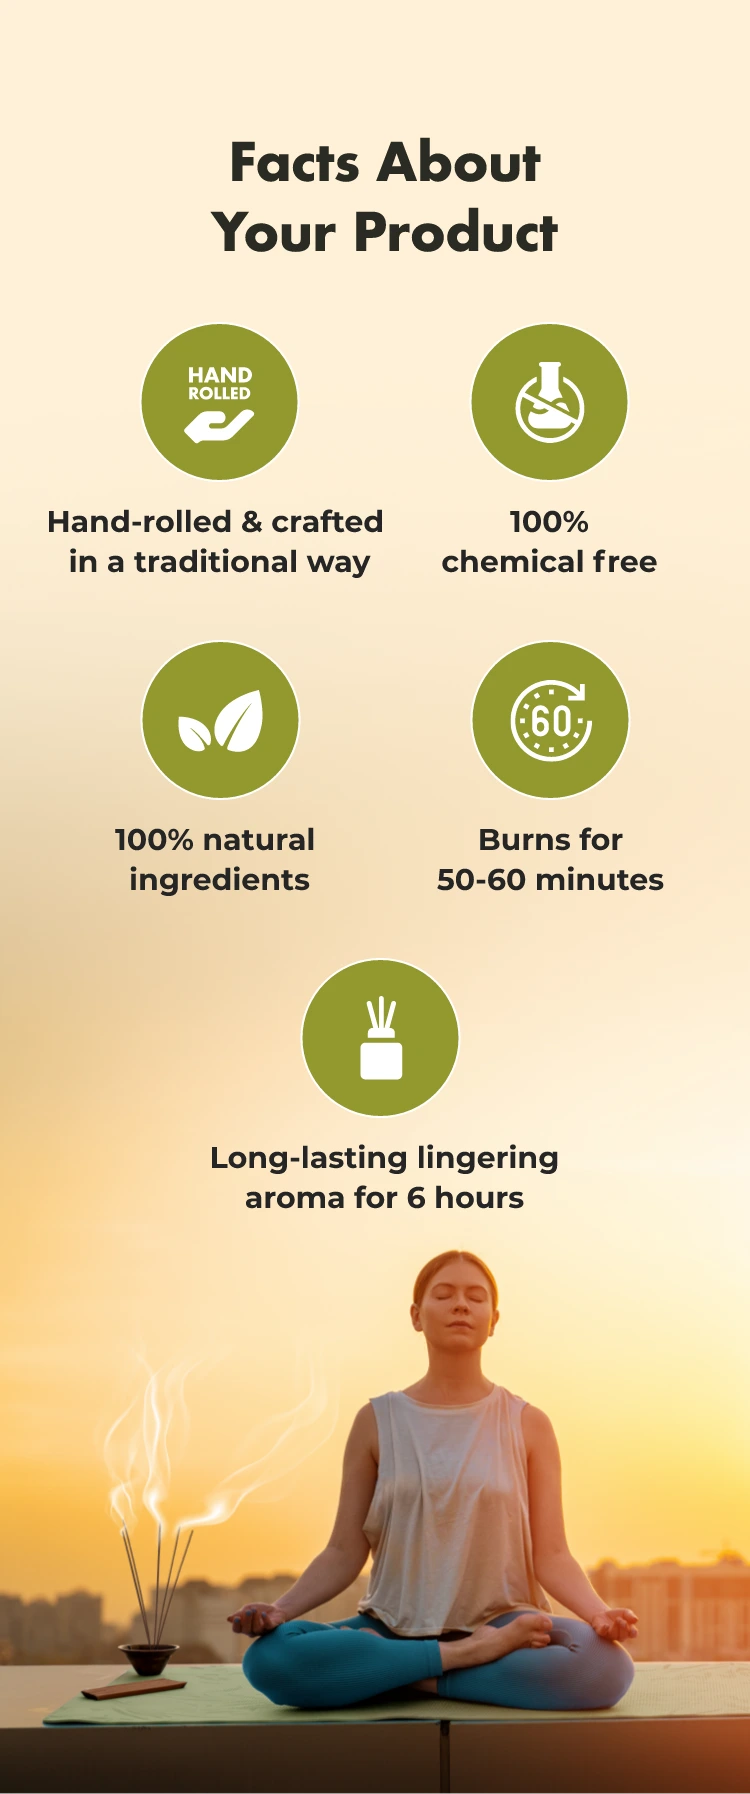 Facts About Your Product
HAND ROLLED
Hand-rolled & crafted in a traditional way
100% chemical free
100% natural ingredients
€60
Burns for 50-60
minutes
Long-lasting lingering aroma for 6 hours